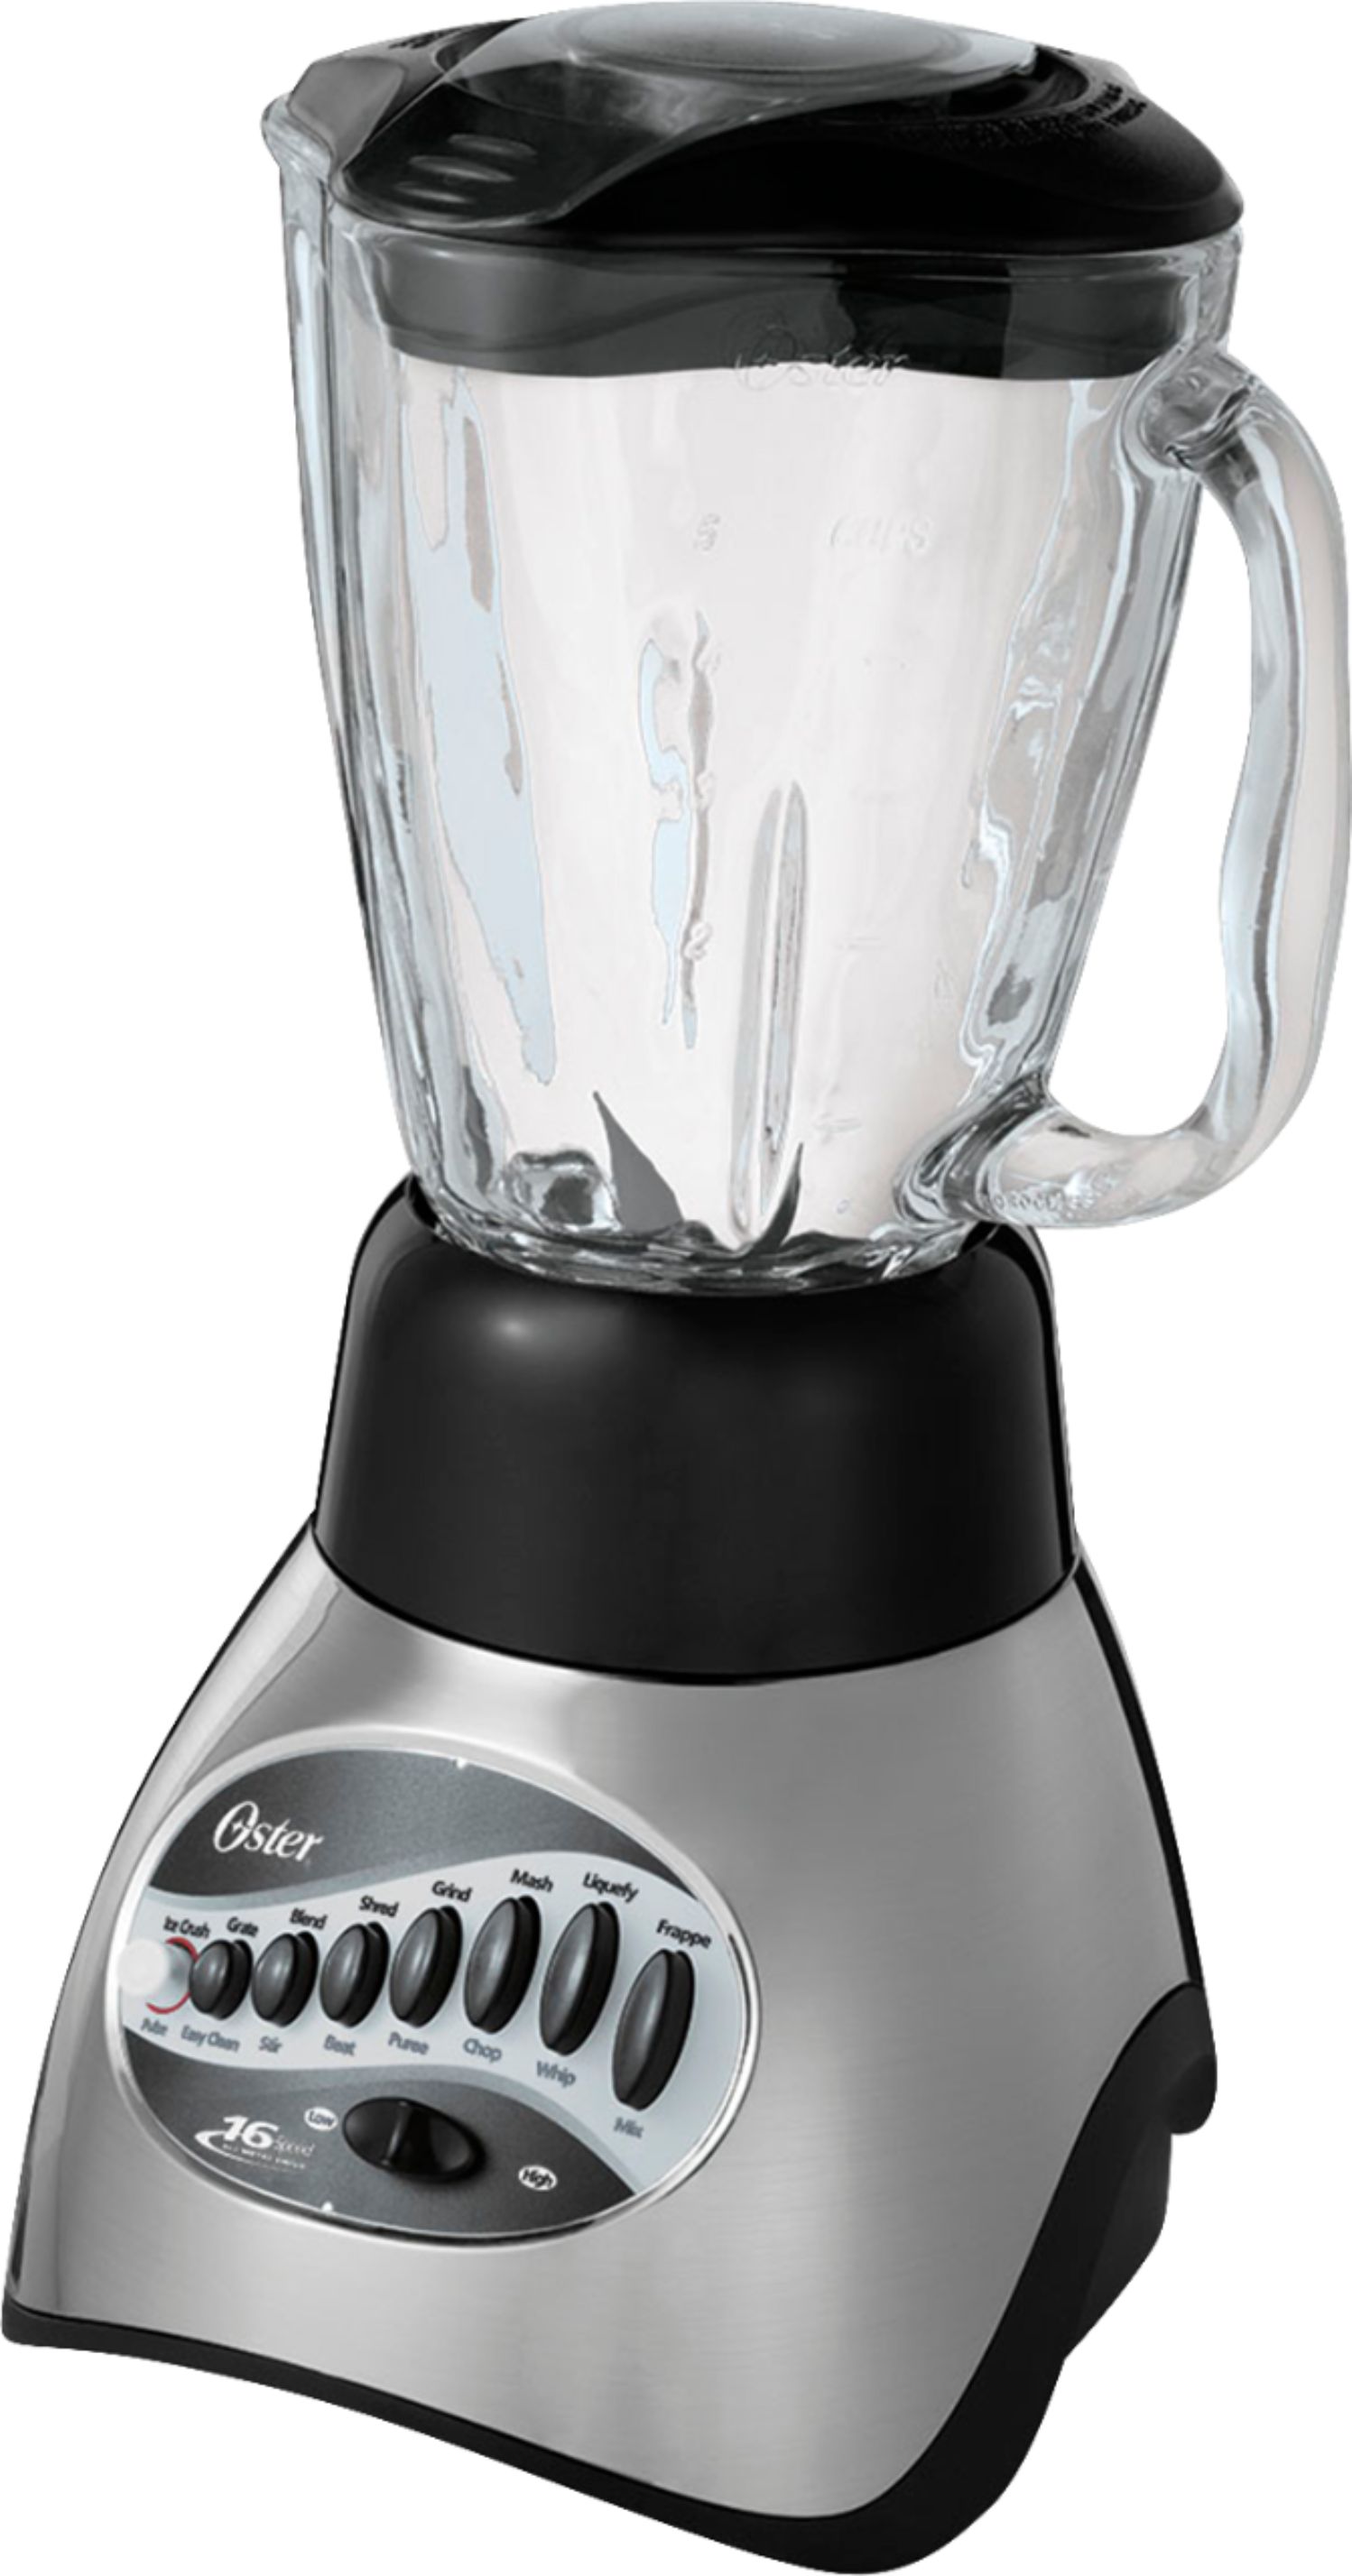 Oster® Classic Series Blender with Reversing Blade Technology and Glass Jar,  Brushed Nickel - Mixers & Blenders, Facebook Marketplace